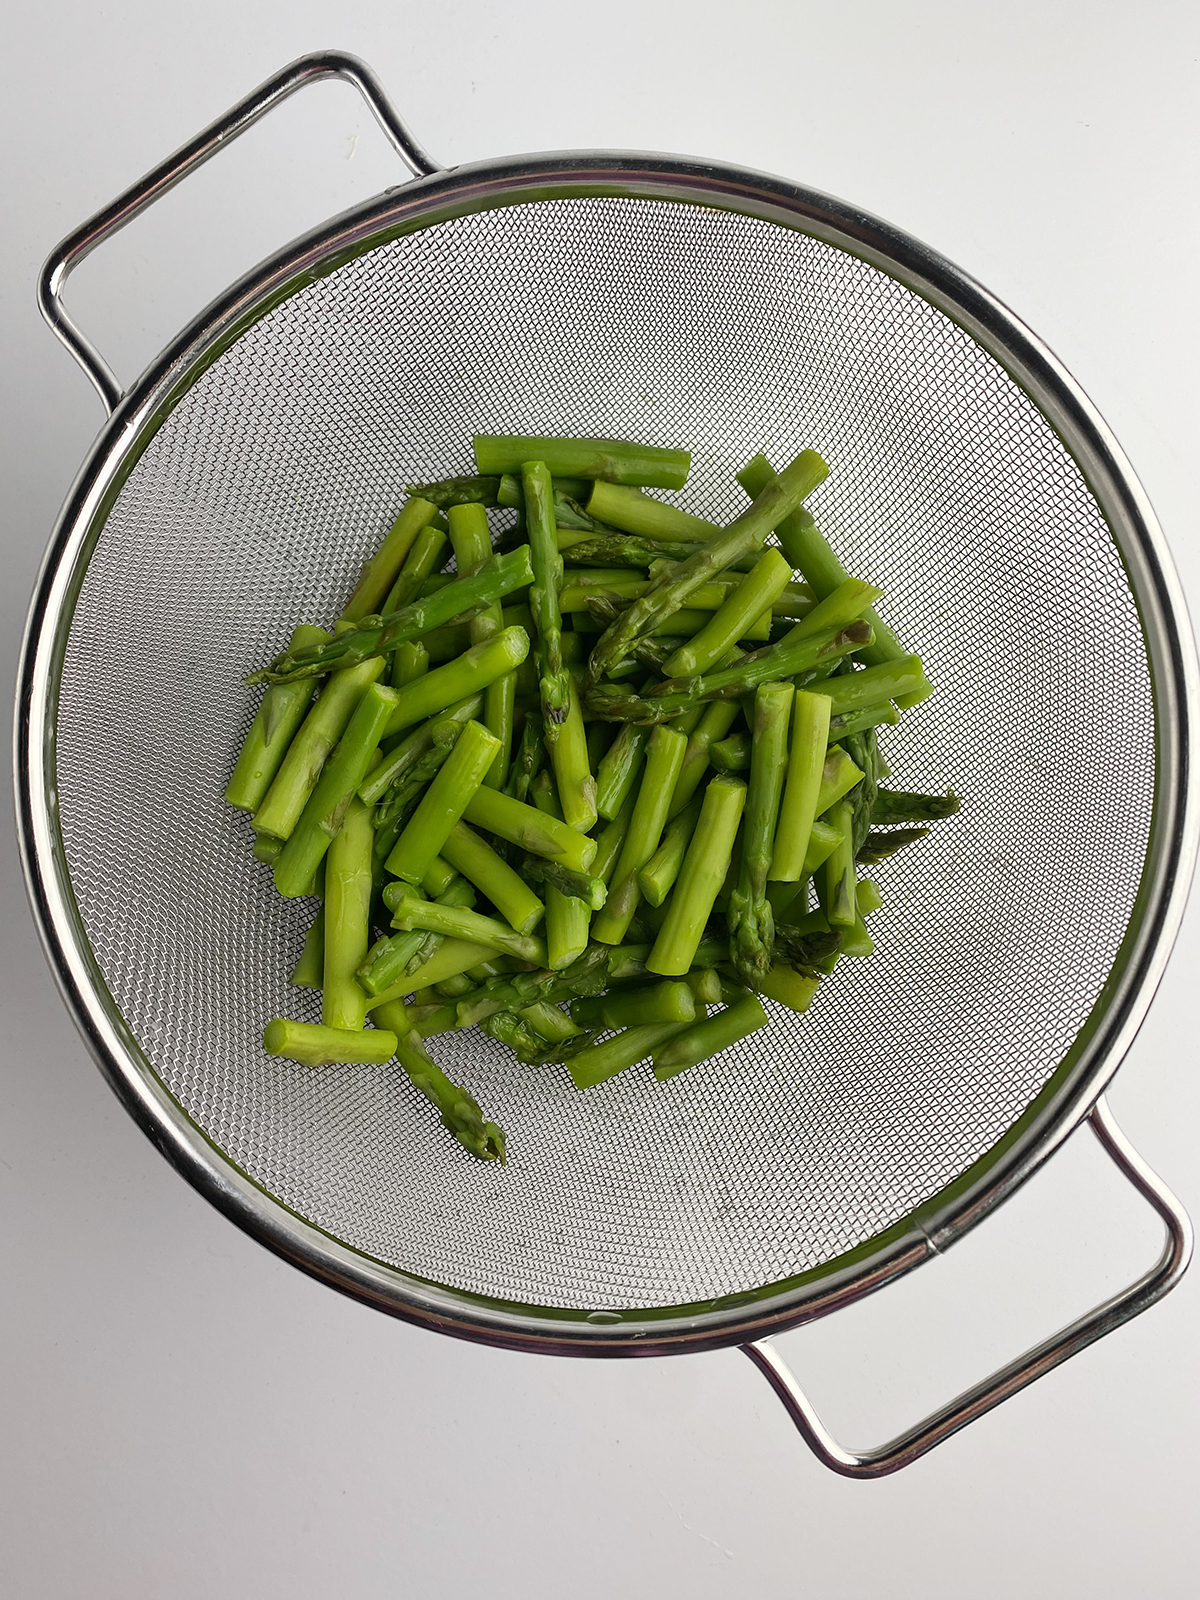 Cooked and drained asparagus in a strainer.